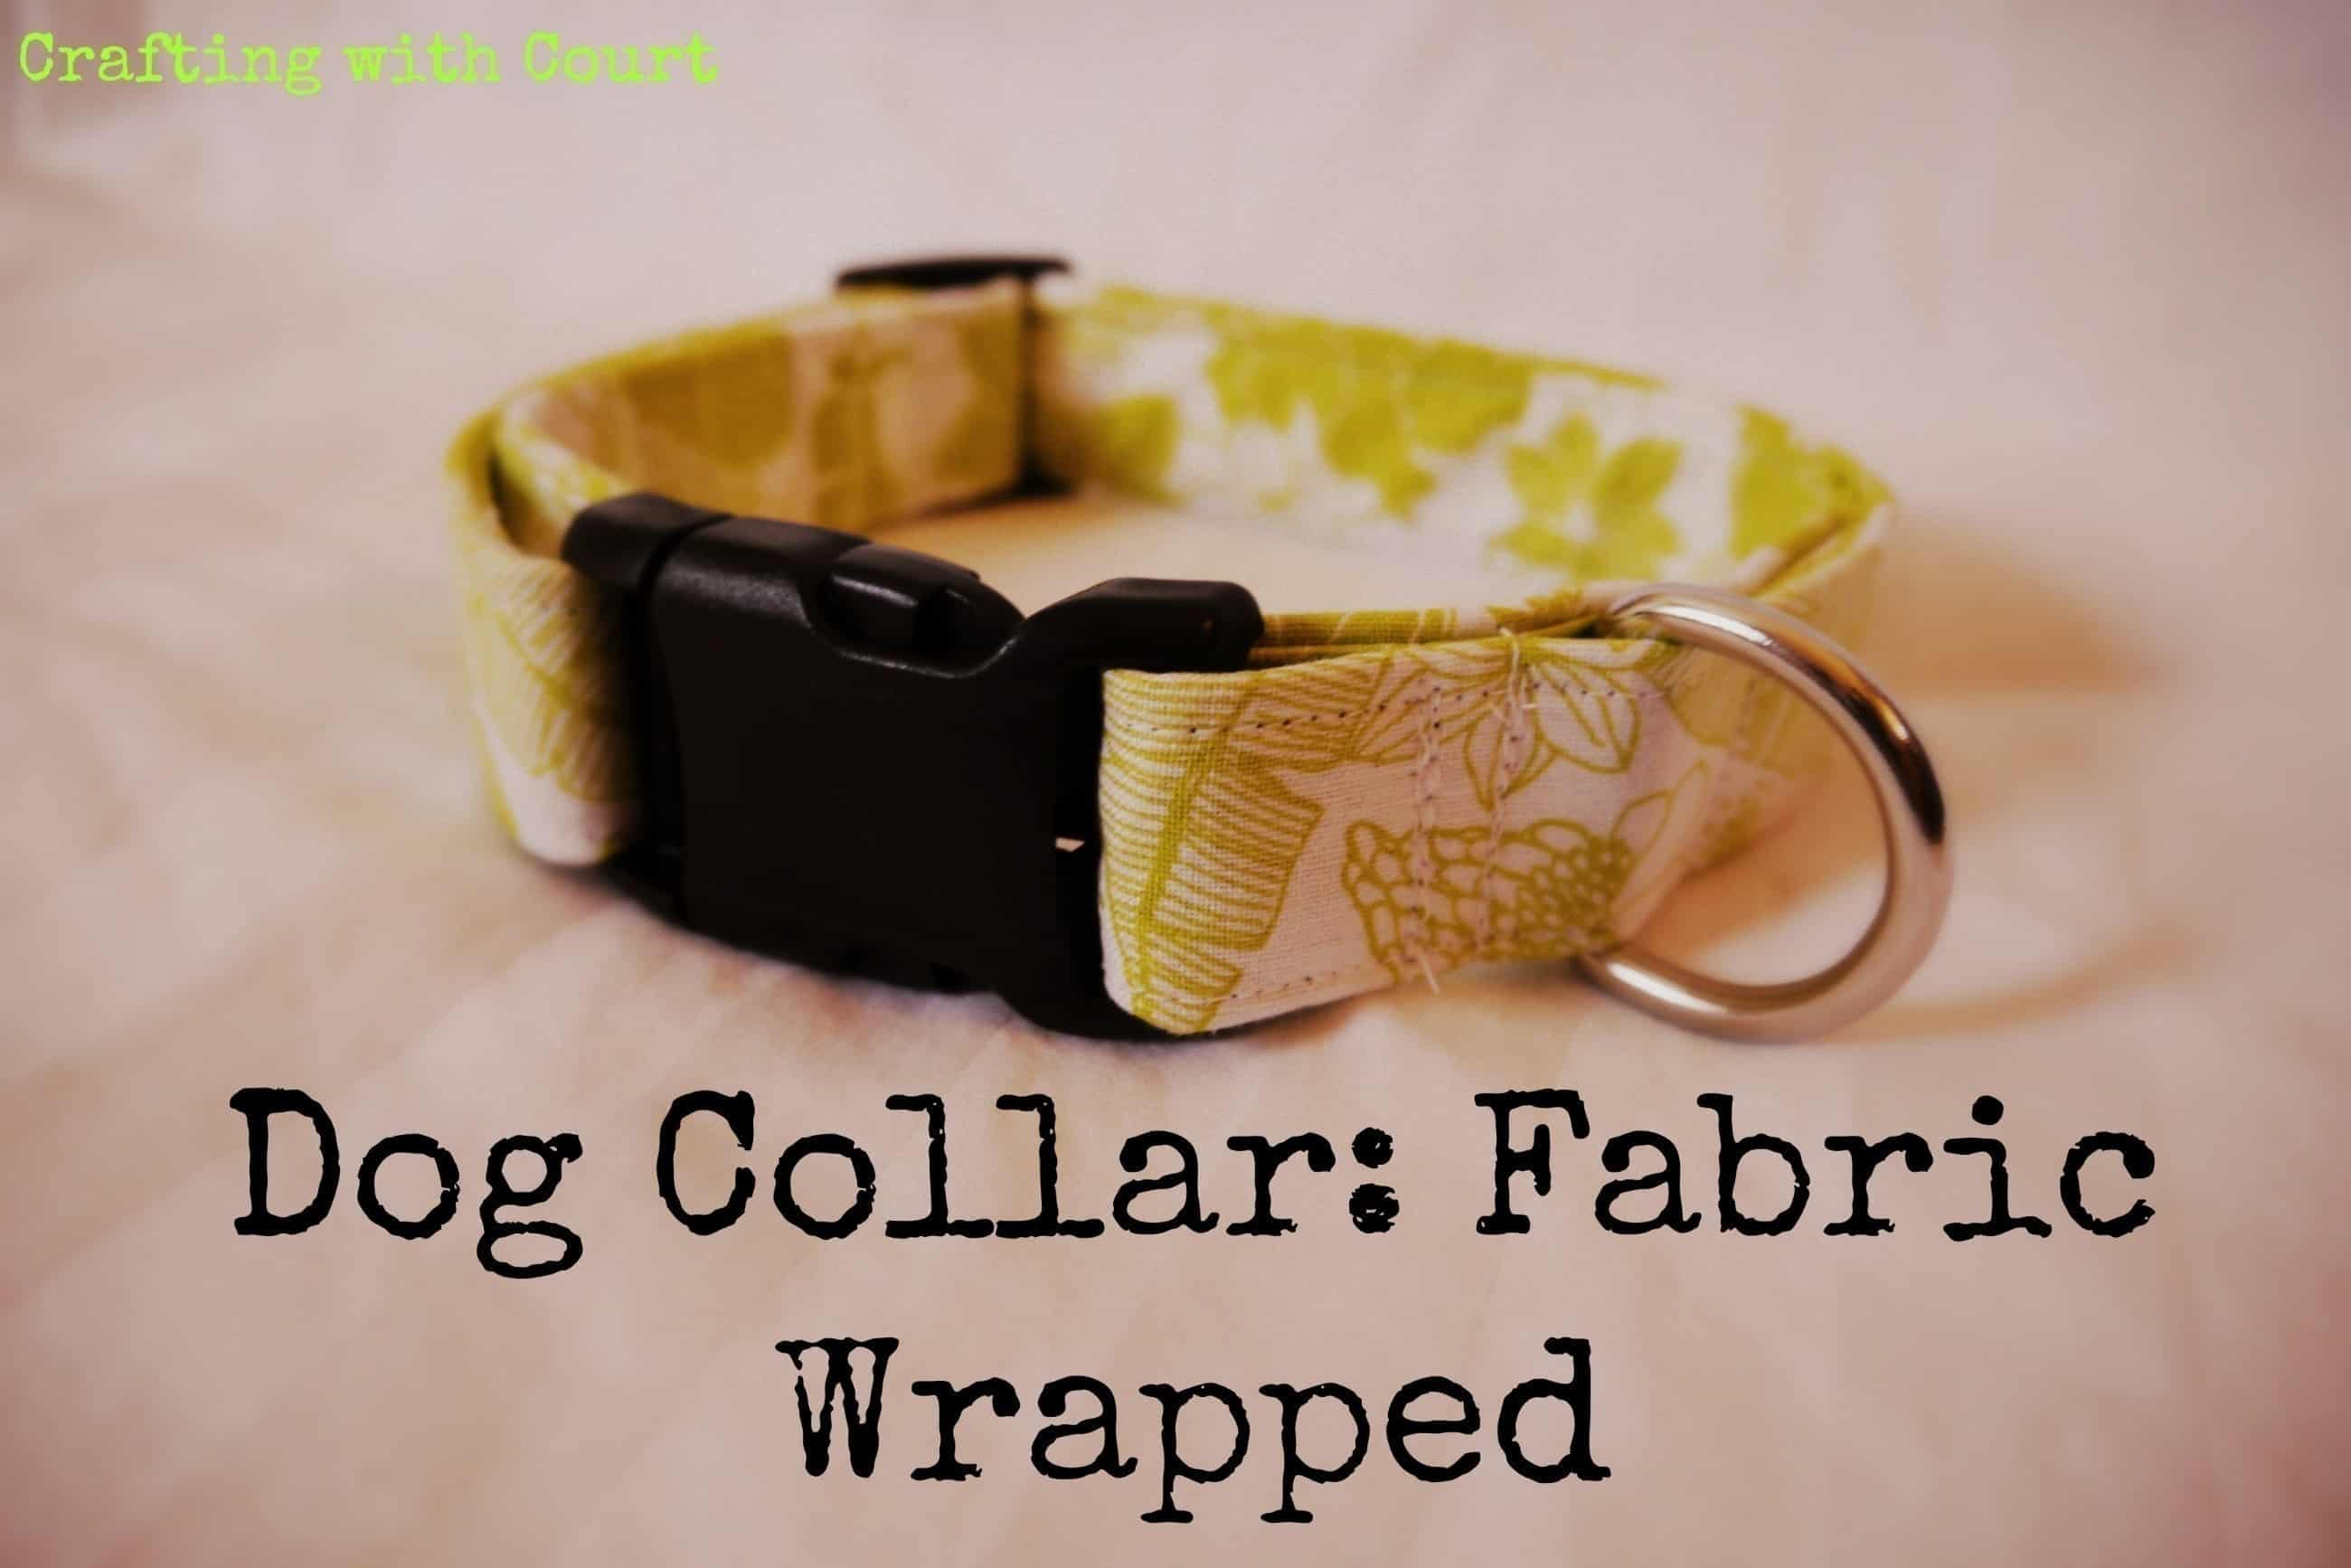 SImple fabric wrapped dog collar